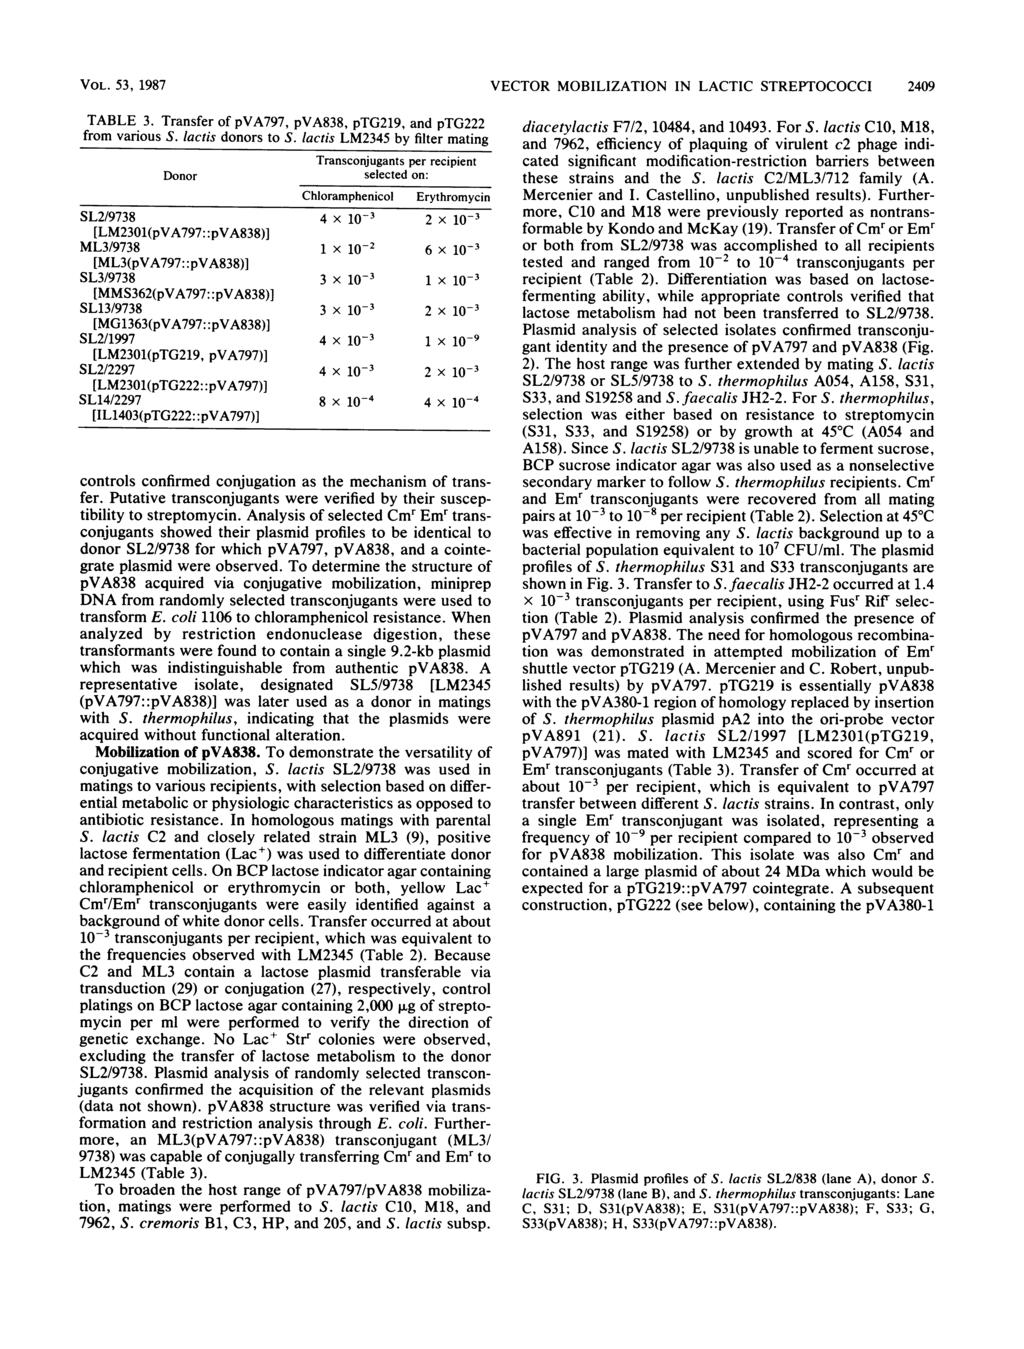 VOL. 53, 1987 VECTOR MOBILIZATION IN LACTIC STREPTOCOCCI 2409 TABLE 3. Transfer of pva797, pva838, ptg219, and ptg222 from various S. lactis donors to S.